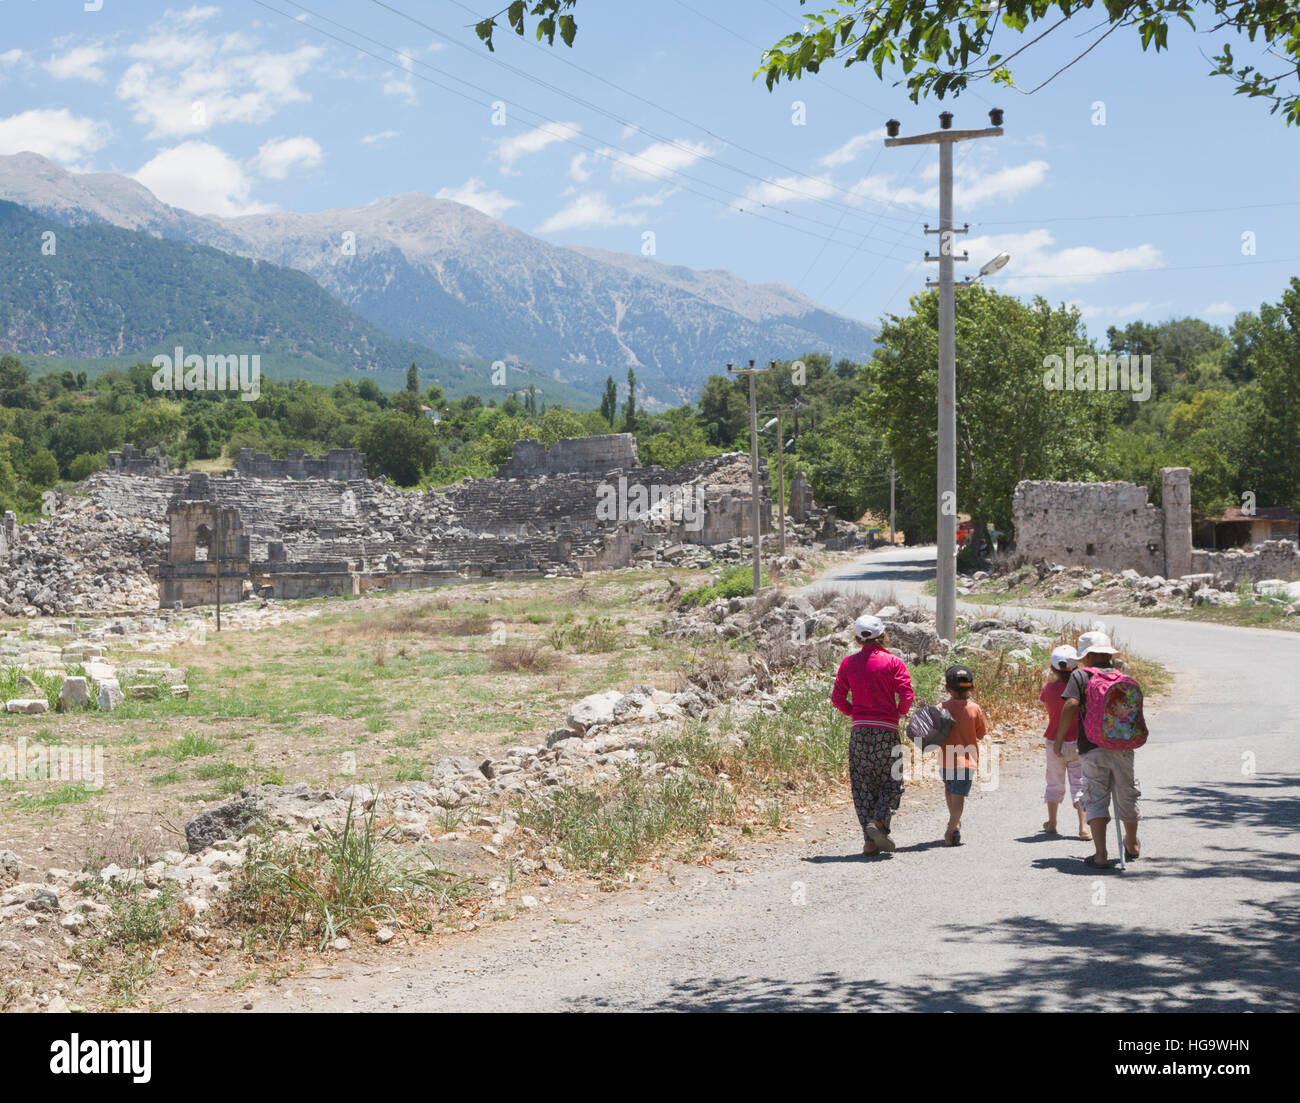 Tlos, Antalya Province, Turkey.  Ruins of the ancient city.  Children on road in front of theatre dating from Roman era. Stock Photo